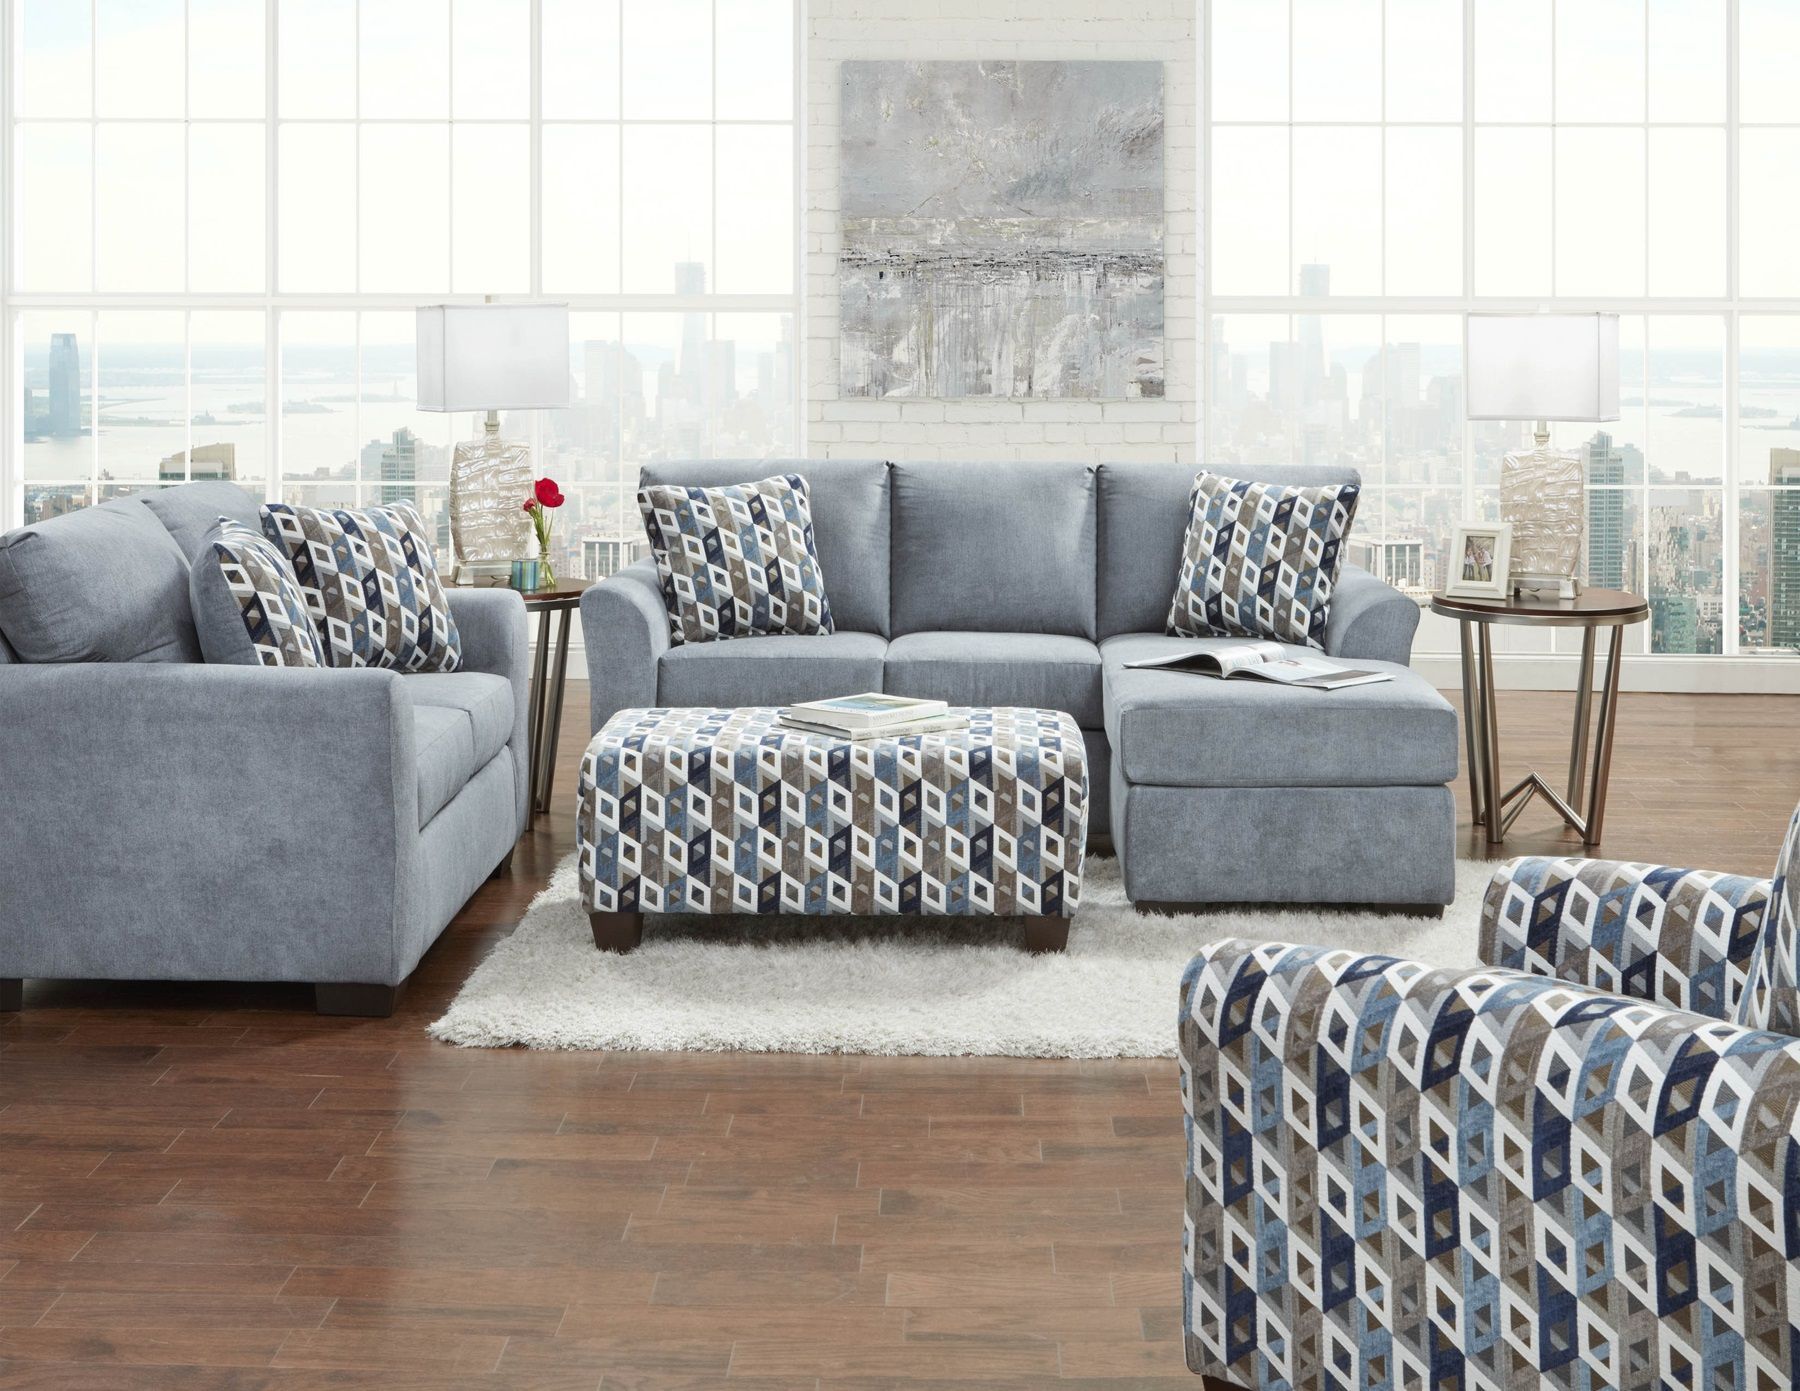 Affordable Furniture Anna Blue/grey Sofa And Chaise – $397 | 4 Piece Pertaining To Sofas In Bluish Grey (View 18 of 20)